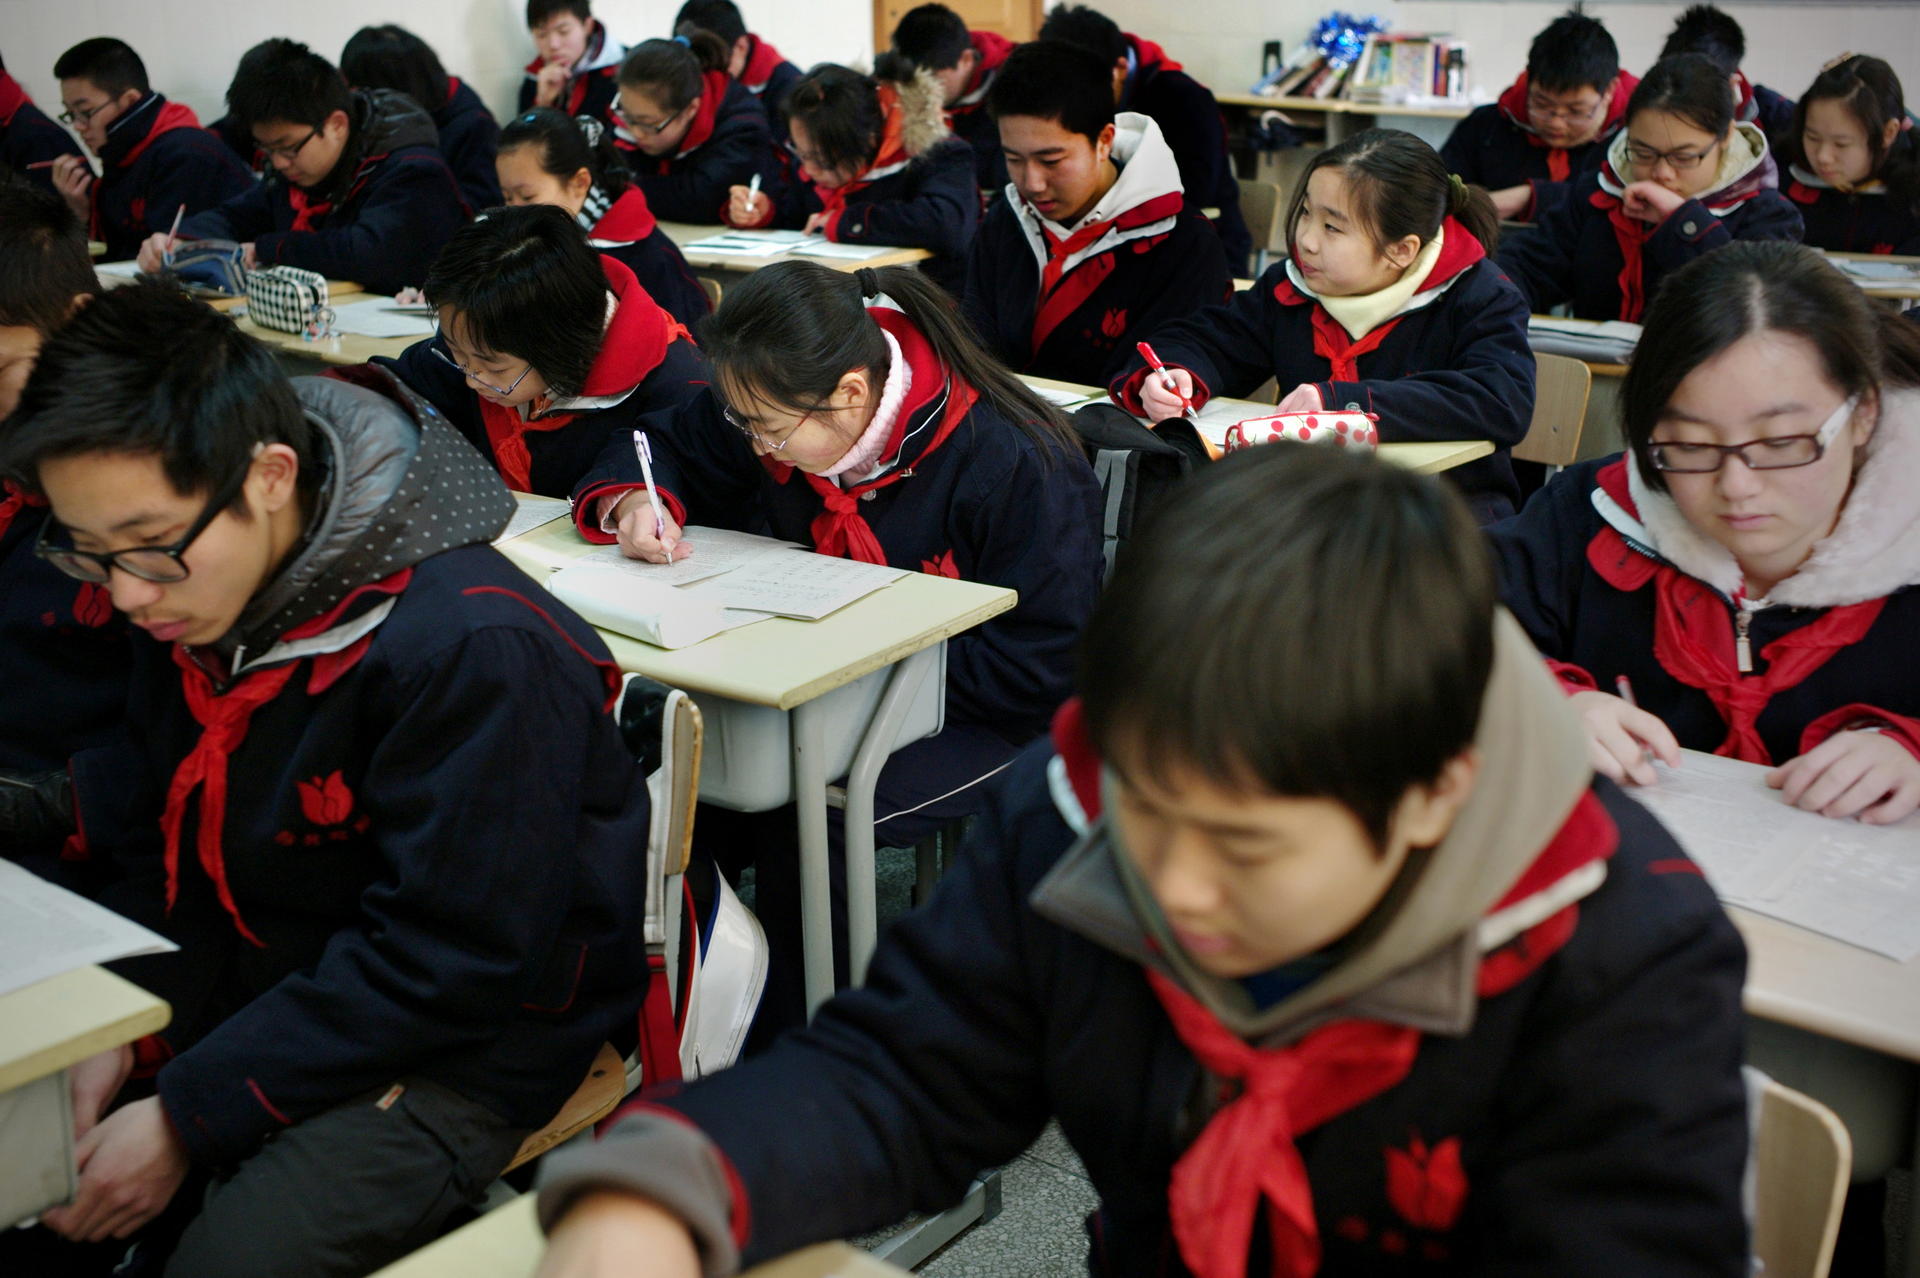 Best in class A school in Shanghai, where 15-year-old maths students recently topped the global Pisa education ratings. Photo: AFP